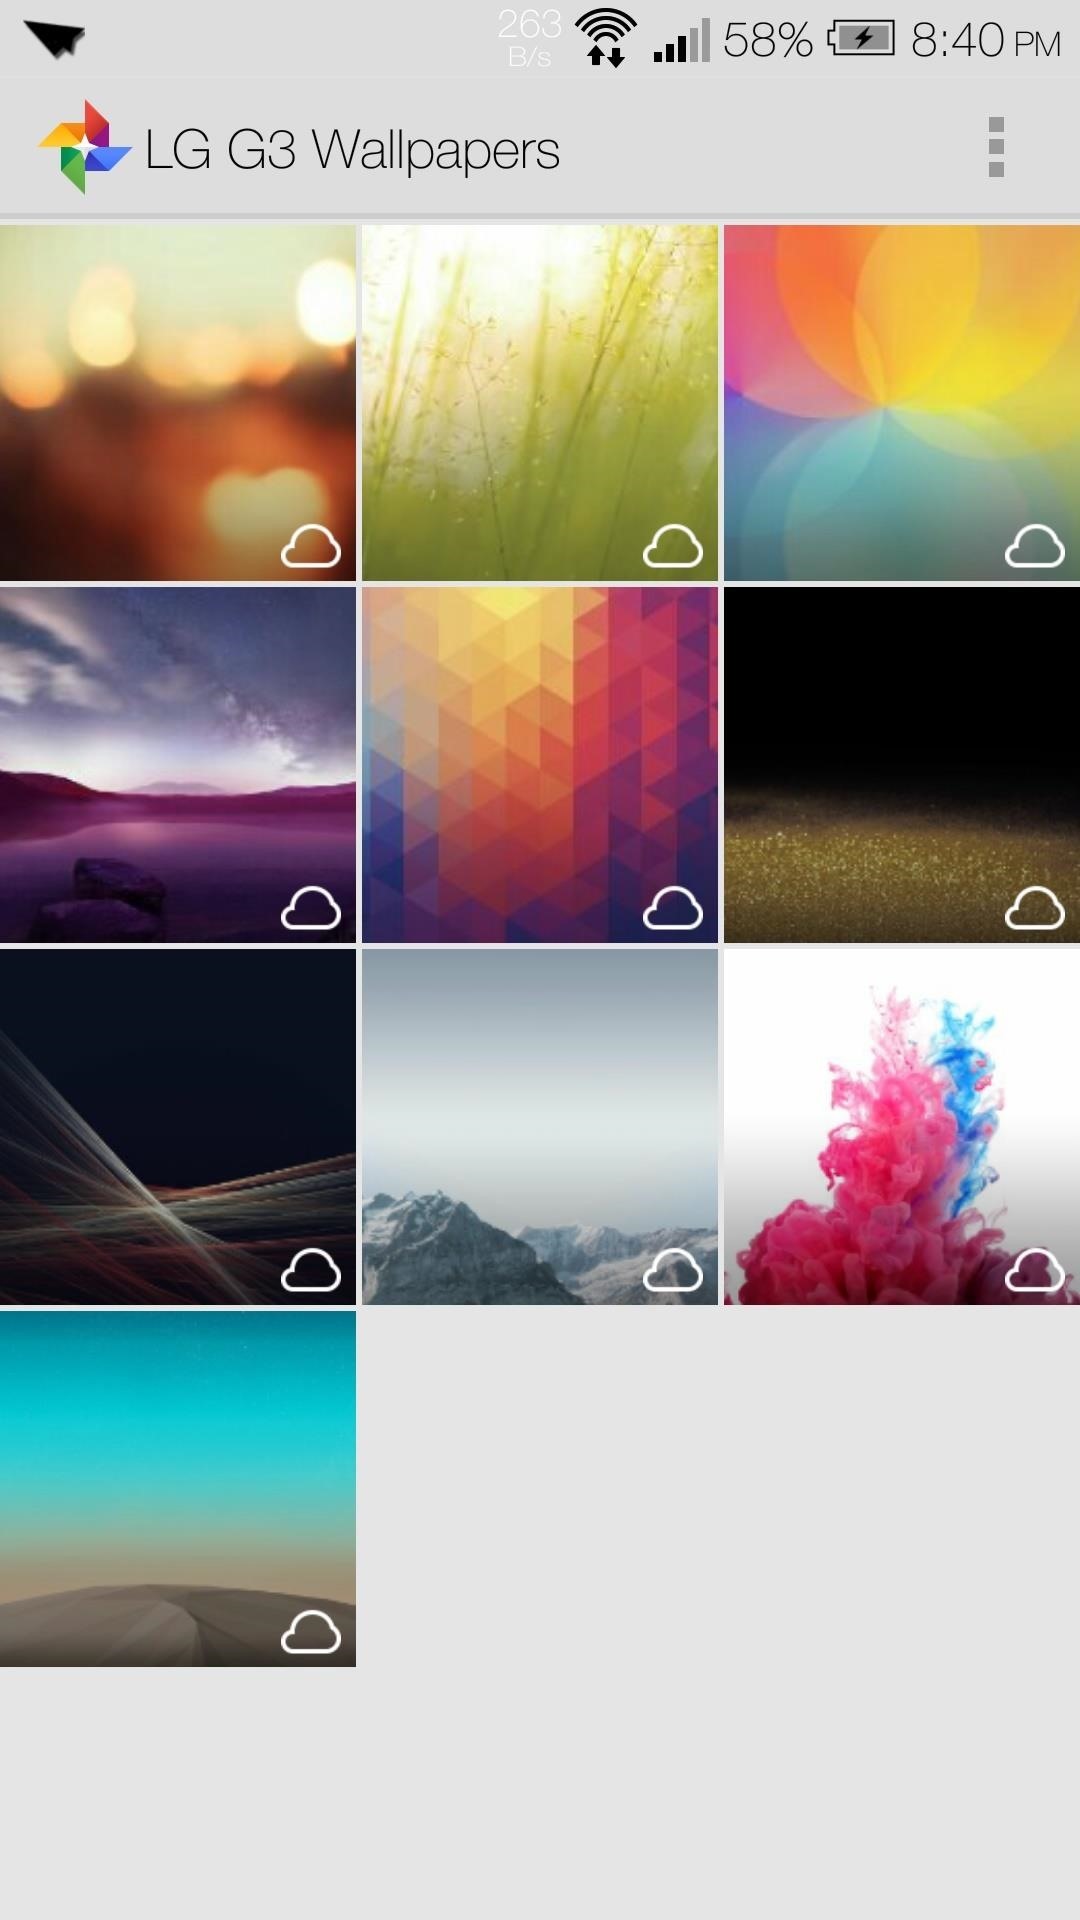 How to Get the LG G3 Exclusive Keyboard, Sounds, & Wallpapers on Any Android Phone or Tablet